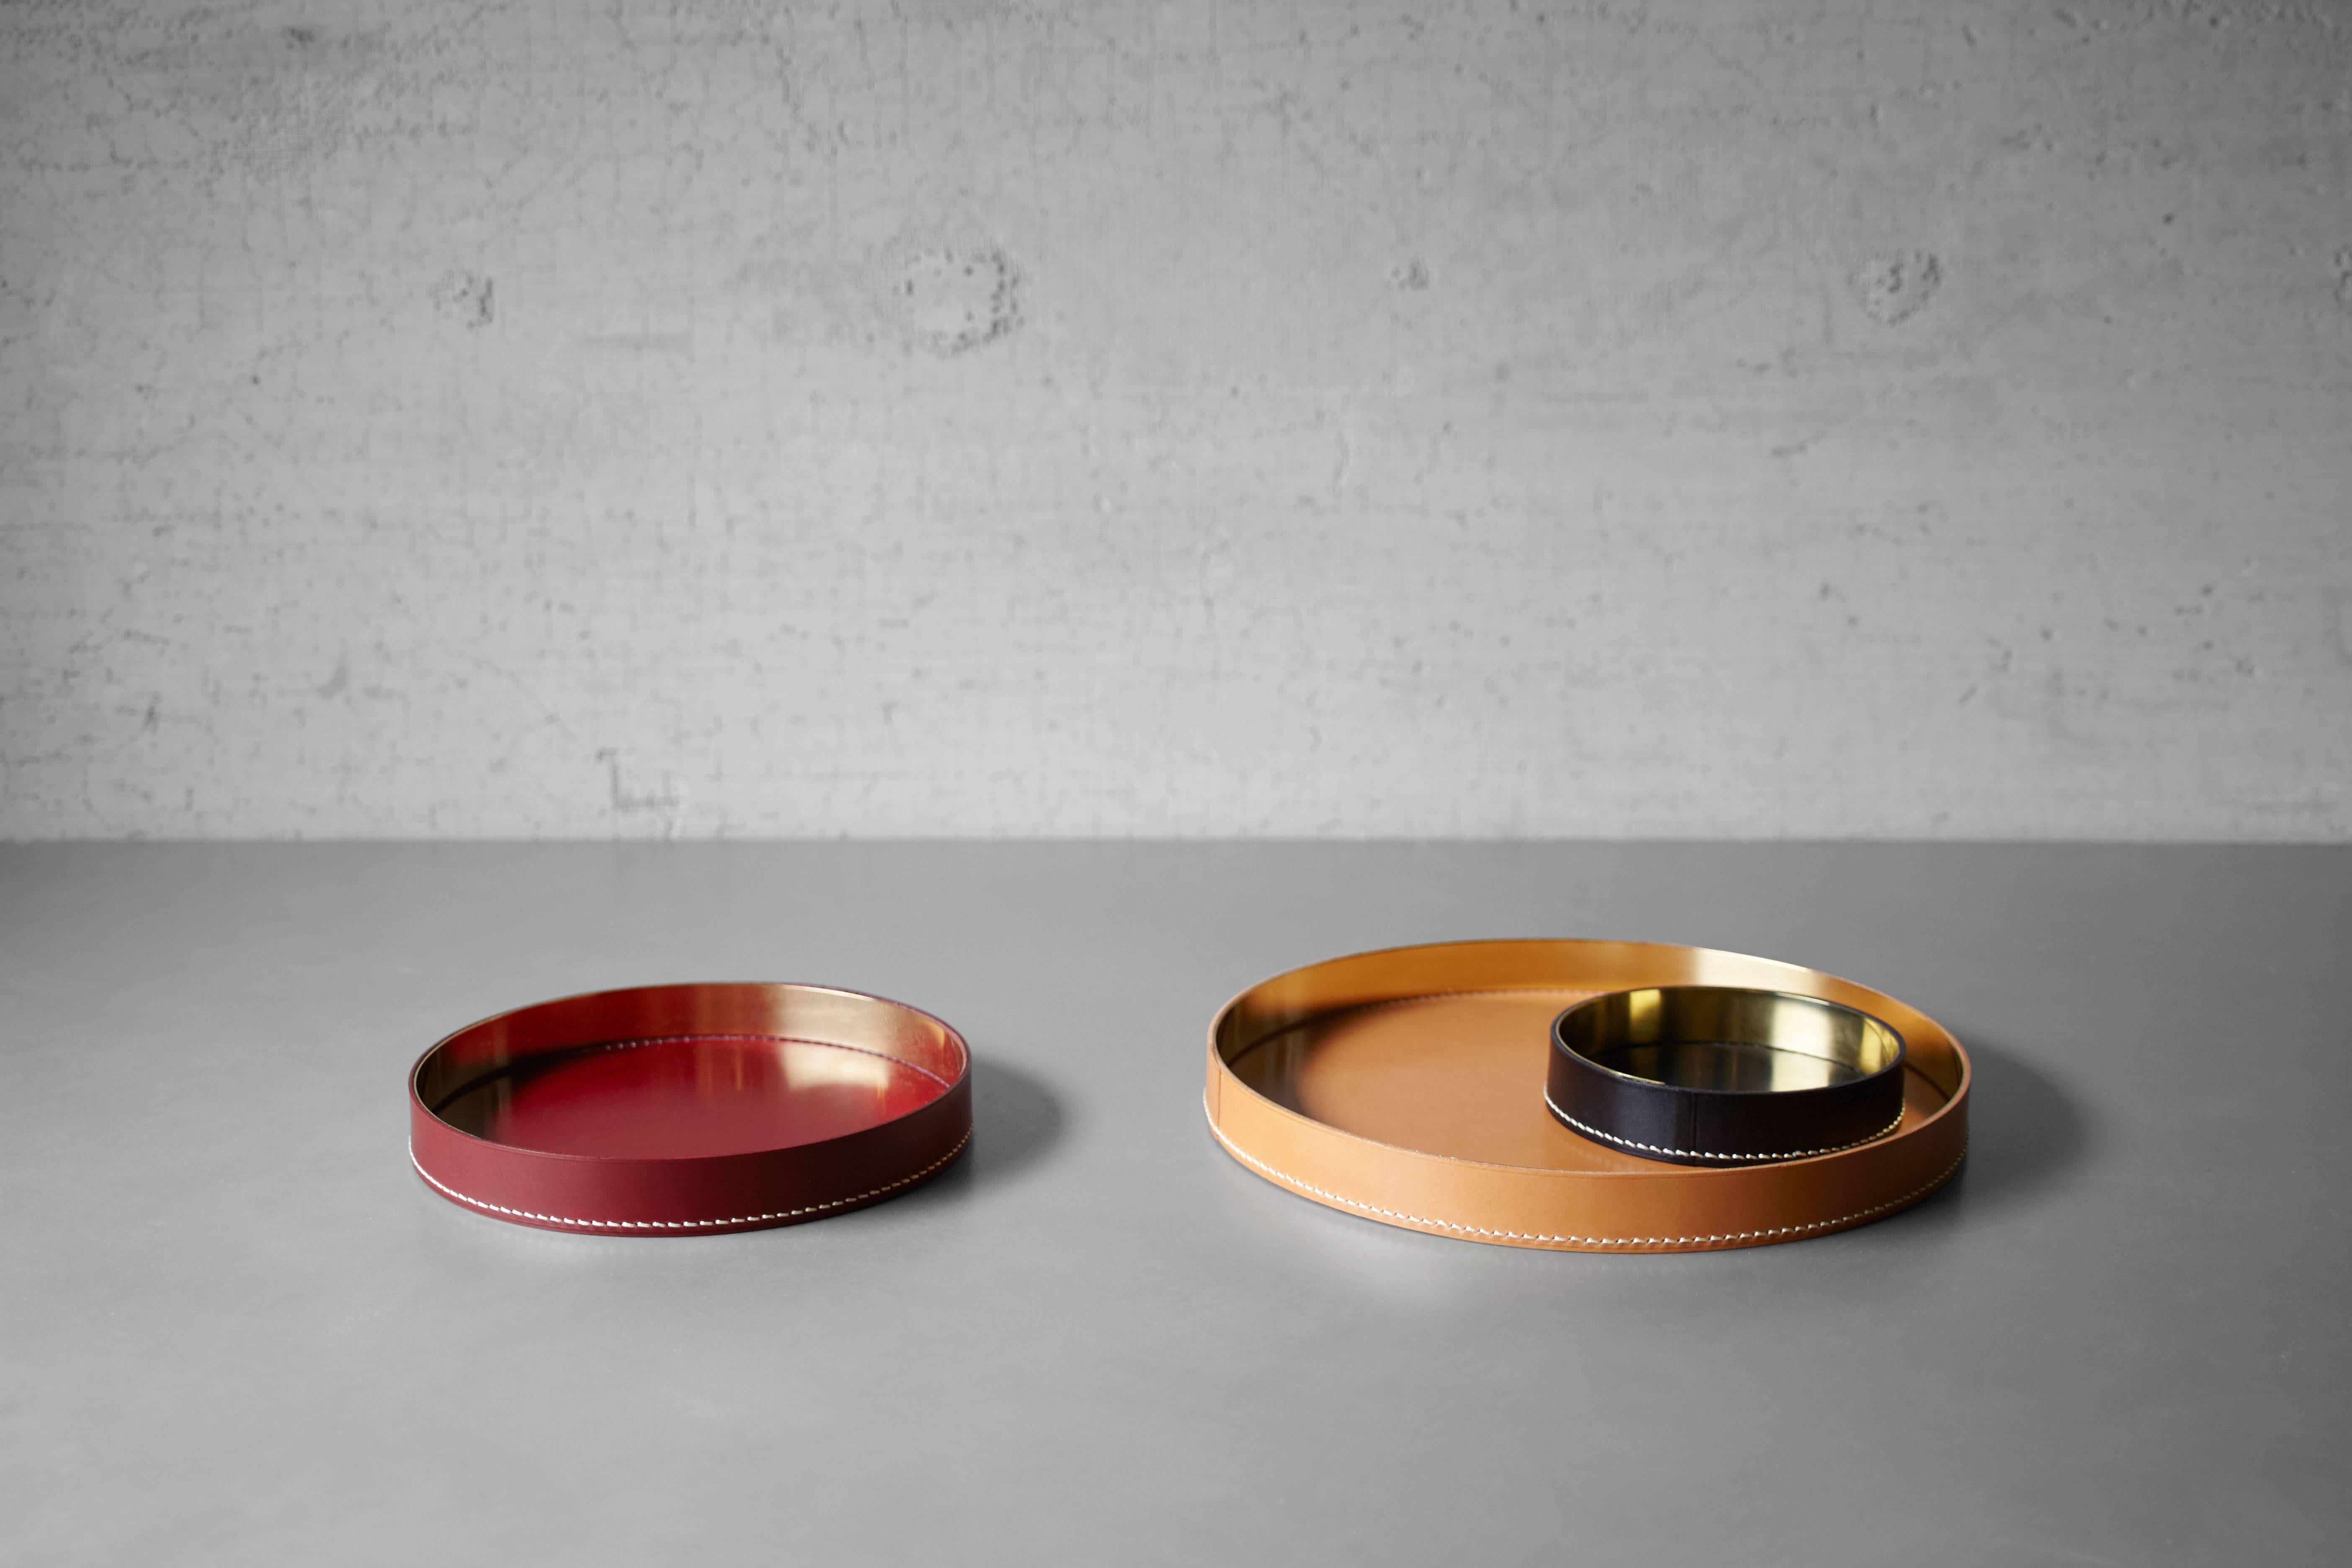 Part of Les Few's Armance collection, this contemporary, cognac colored, round, leather and brass, modern, Minimalist tray or centerpiece is made by artisans in Sweden. The leather comes in cognac, but can be special ordered in black or burgundy.